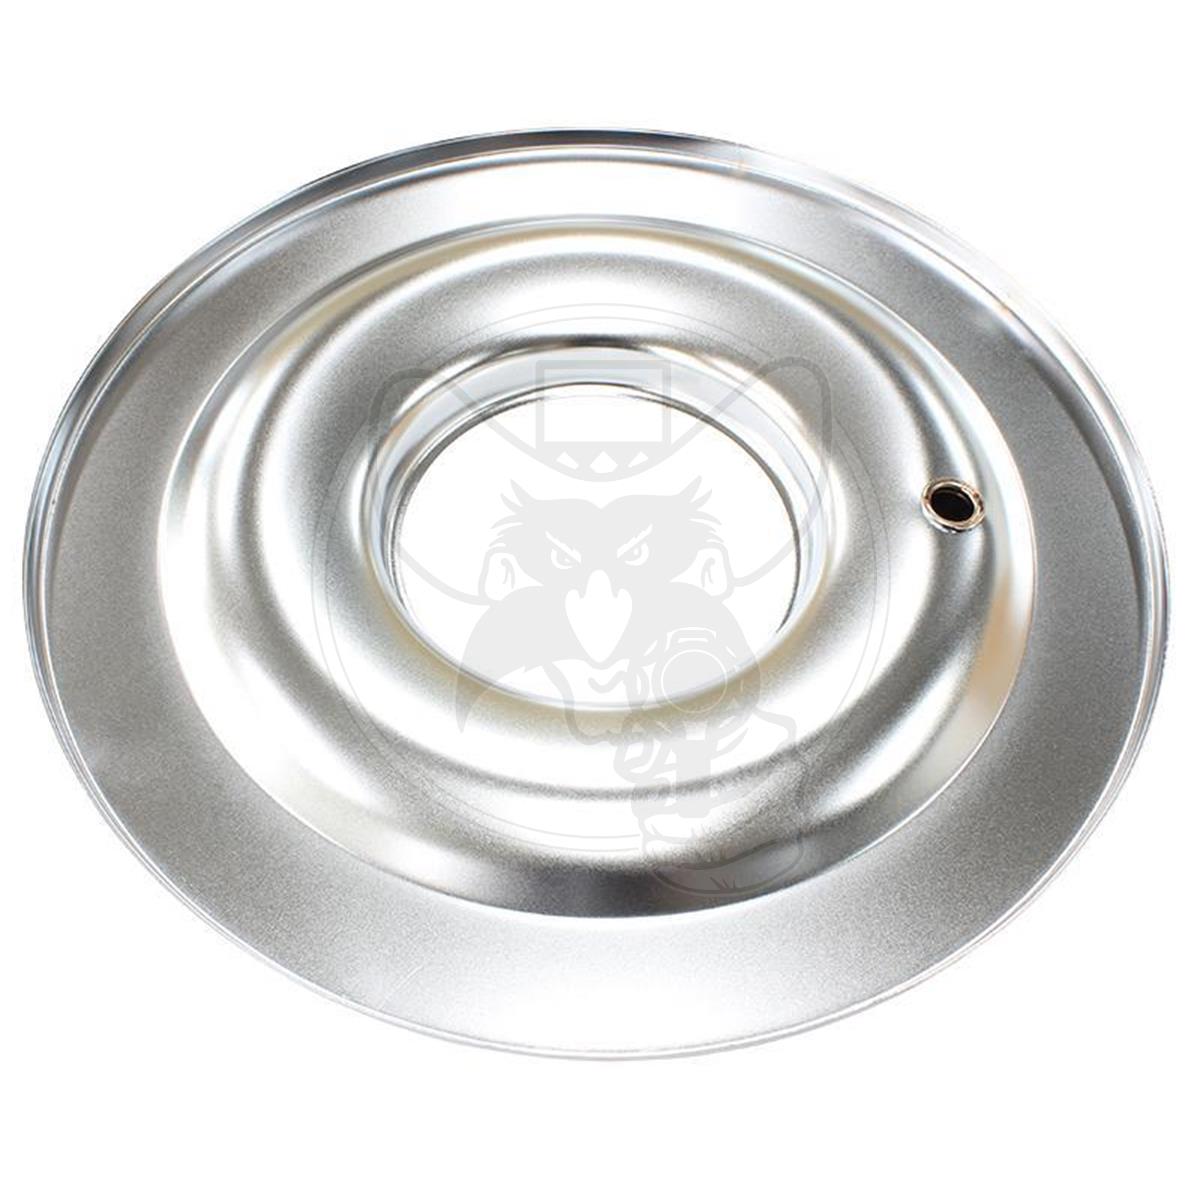 AEROFLOW 14" AIR CLEANER BASE ONLY, CHROME, FLAT FITS 5-1/8" NECK